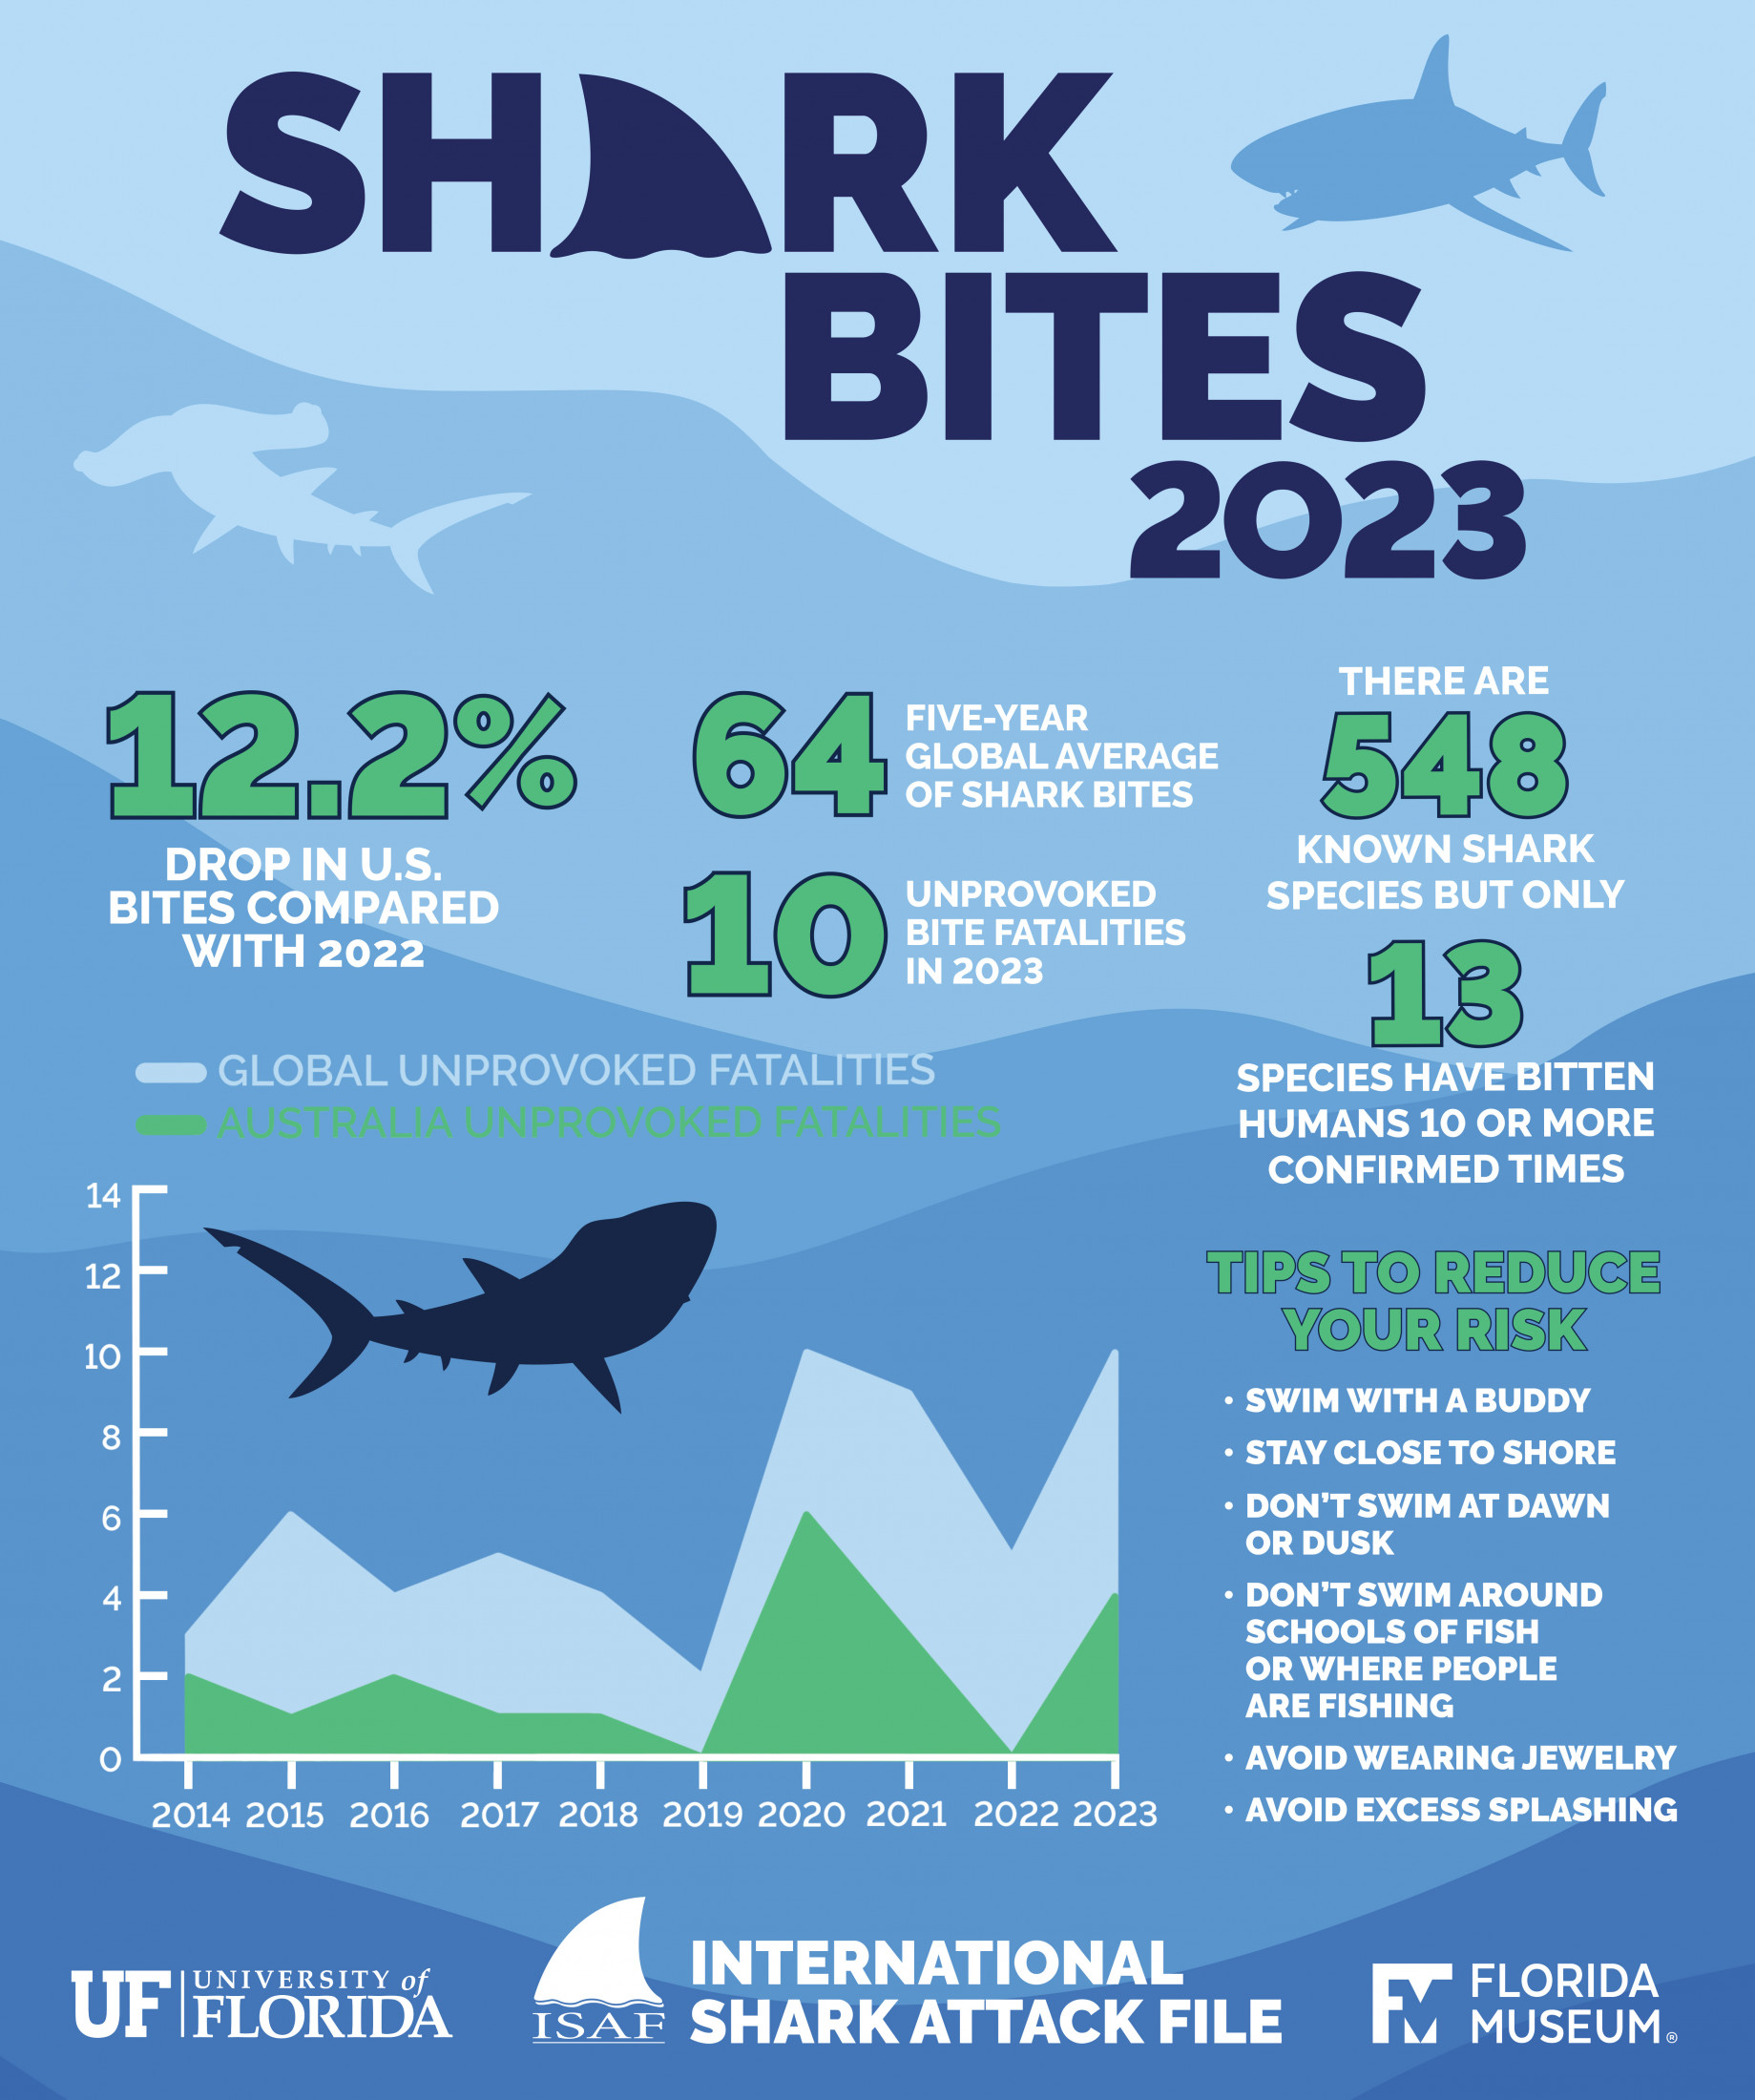 A graphic with statistics about shark bites in 2023 and tips to reduce risk.